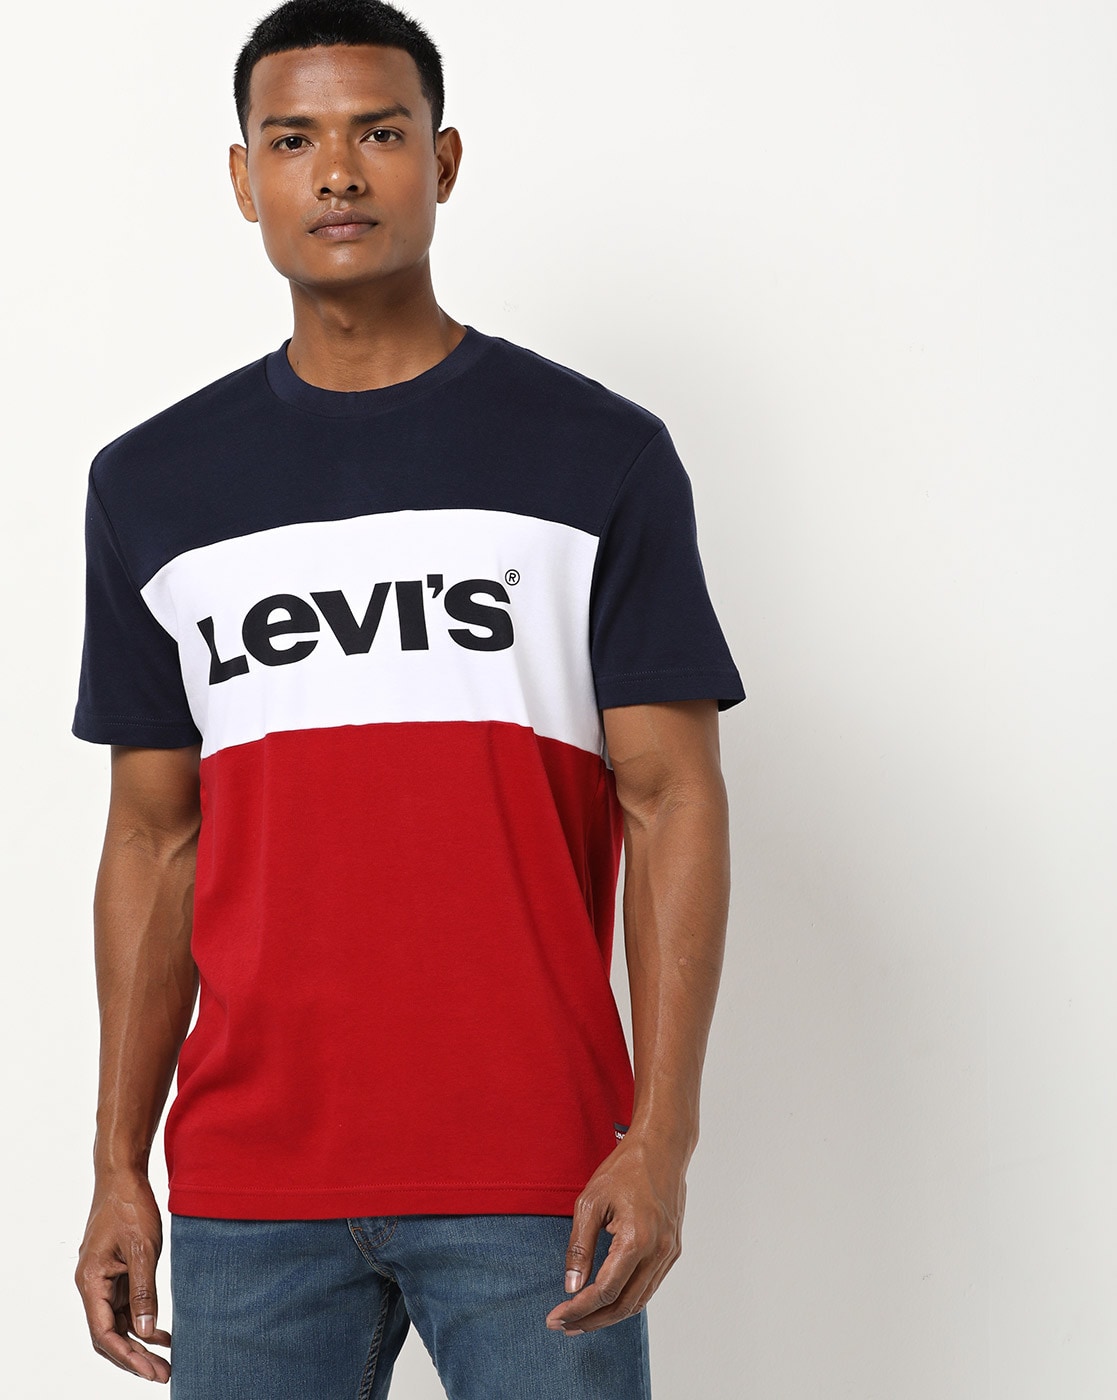 Buy Navy Blue \u0026 Red Tshirts for Men by 